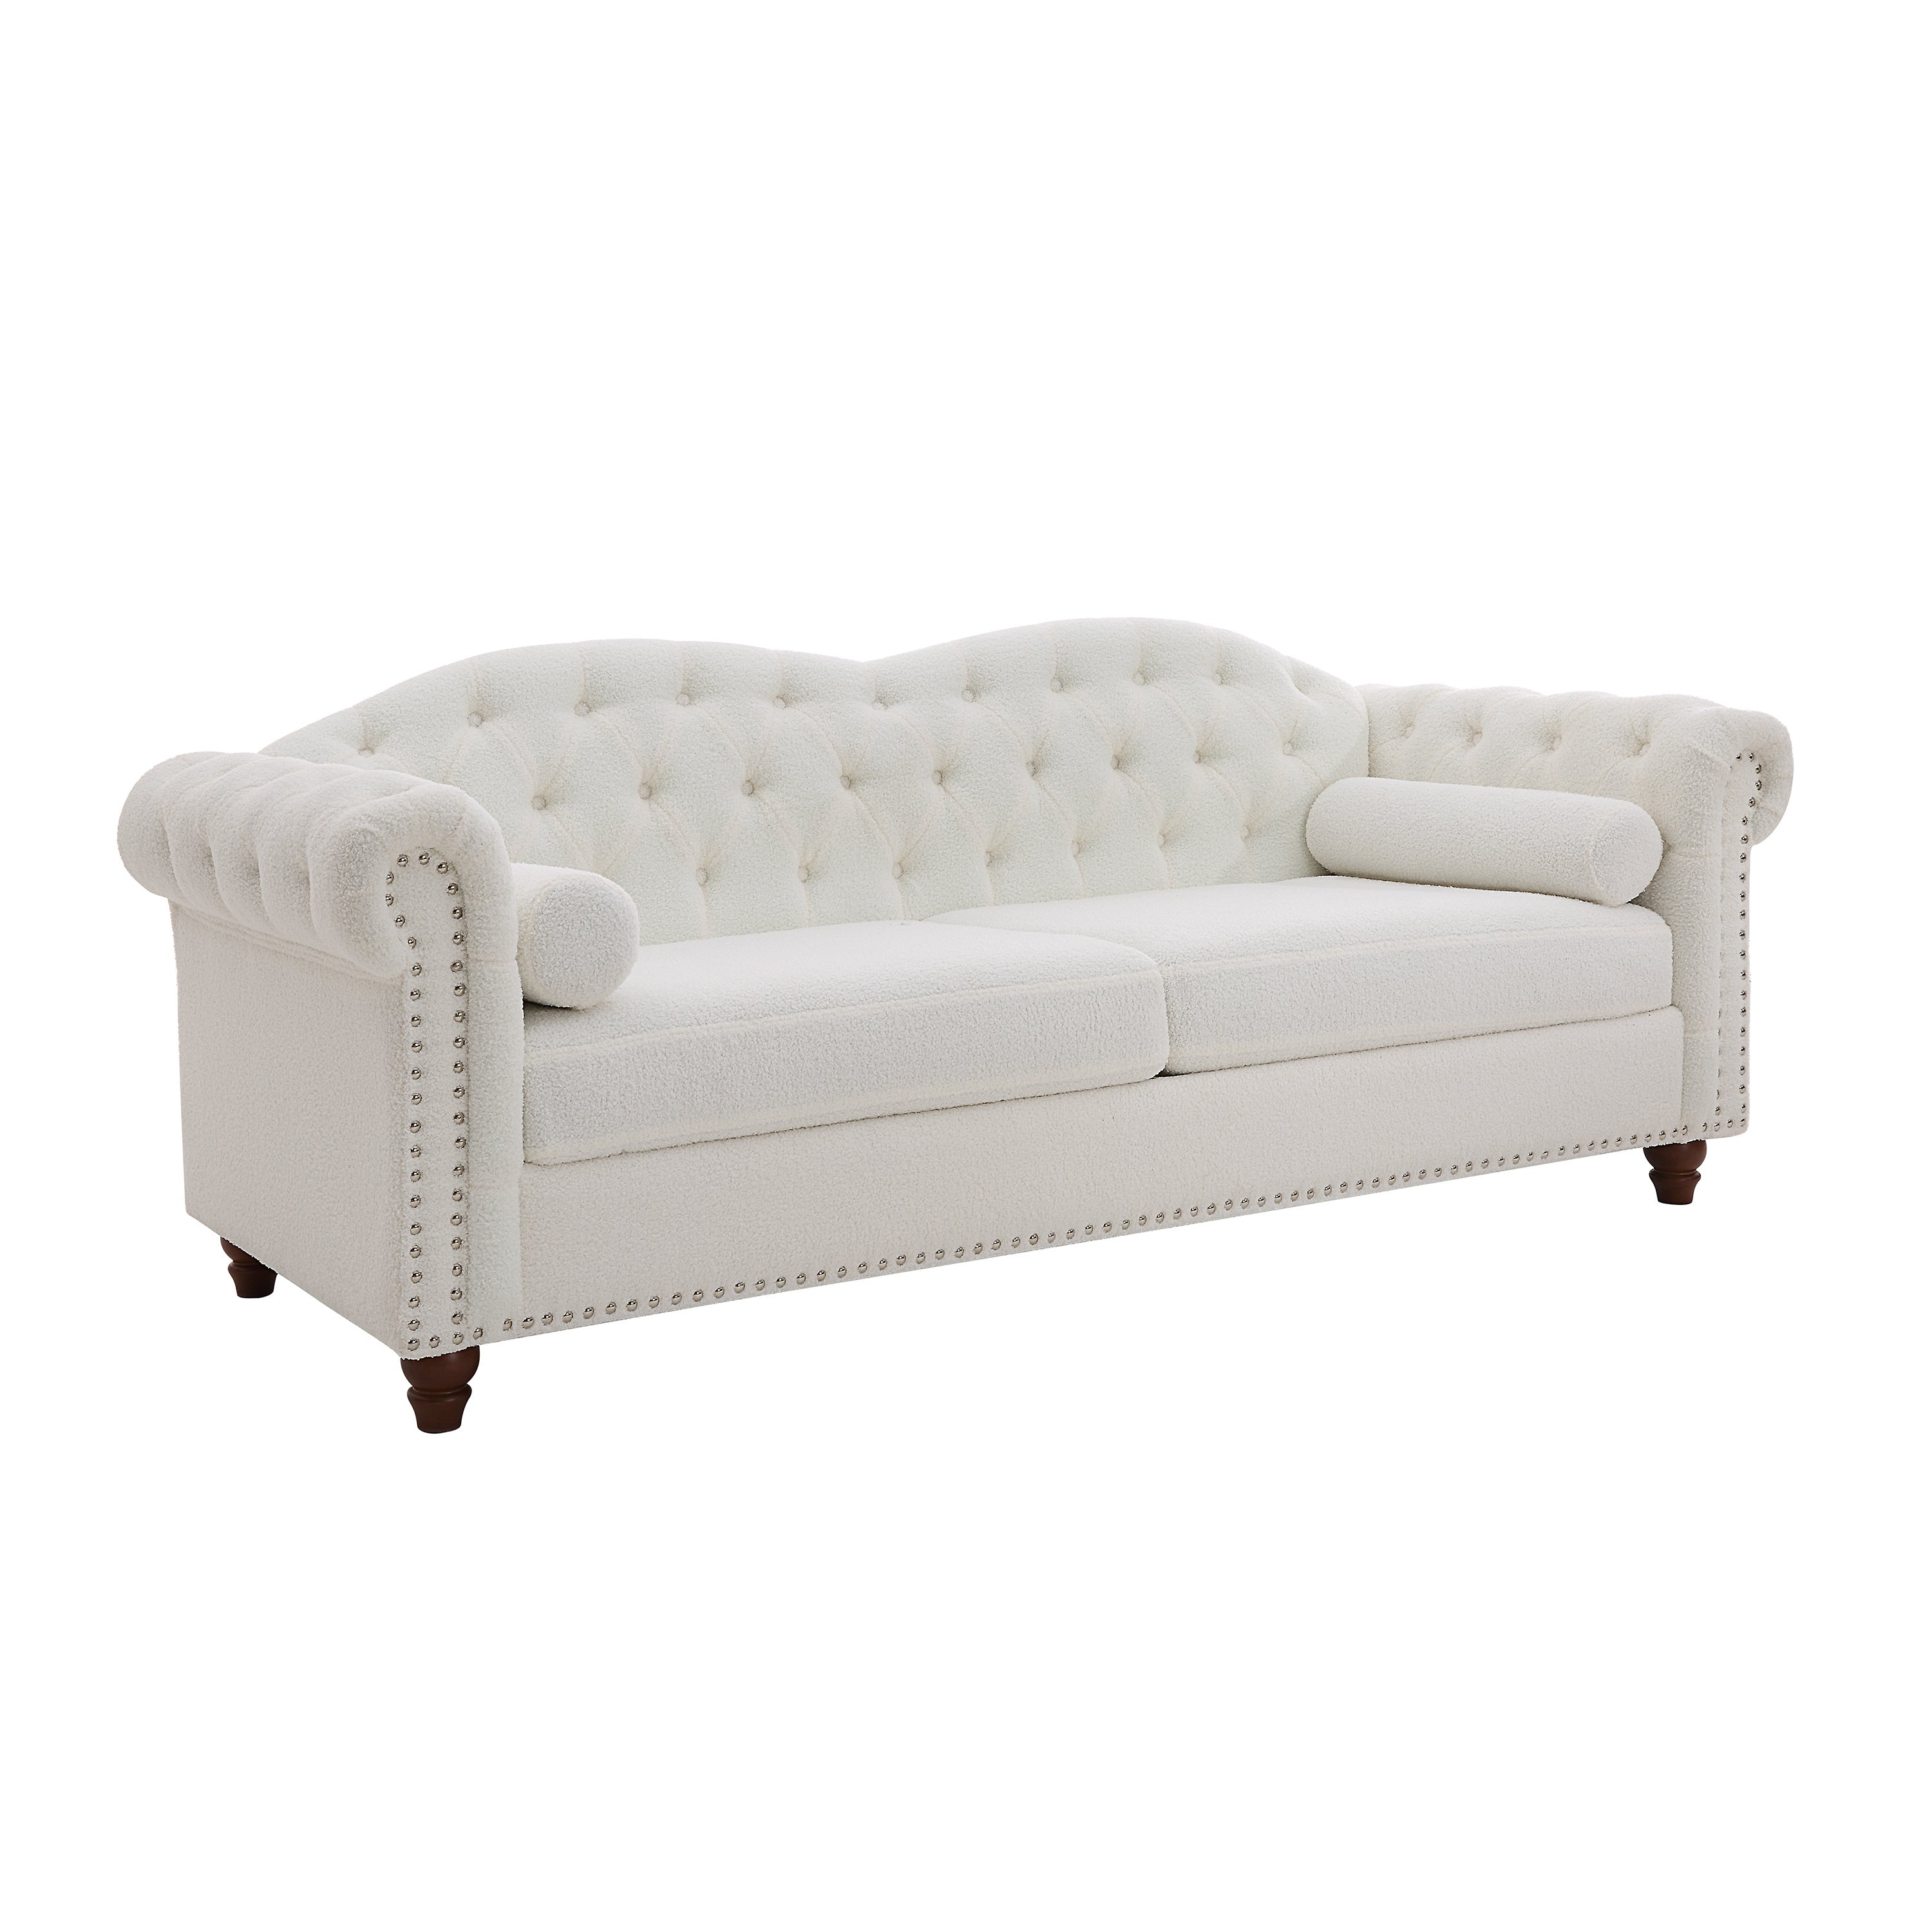 84" White Boucle Fabric Chesterfield Sofa